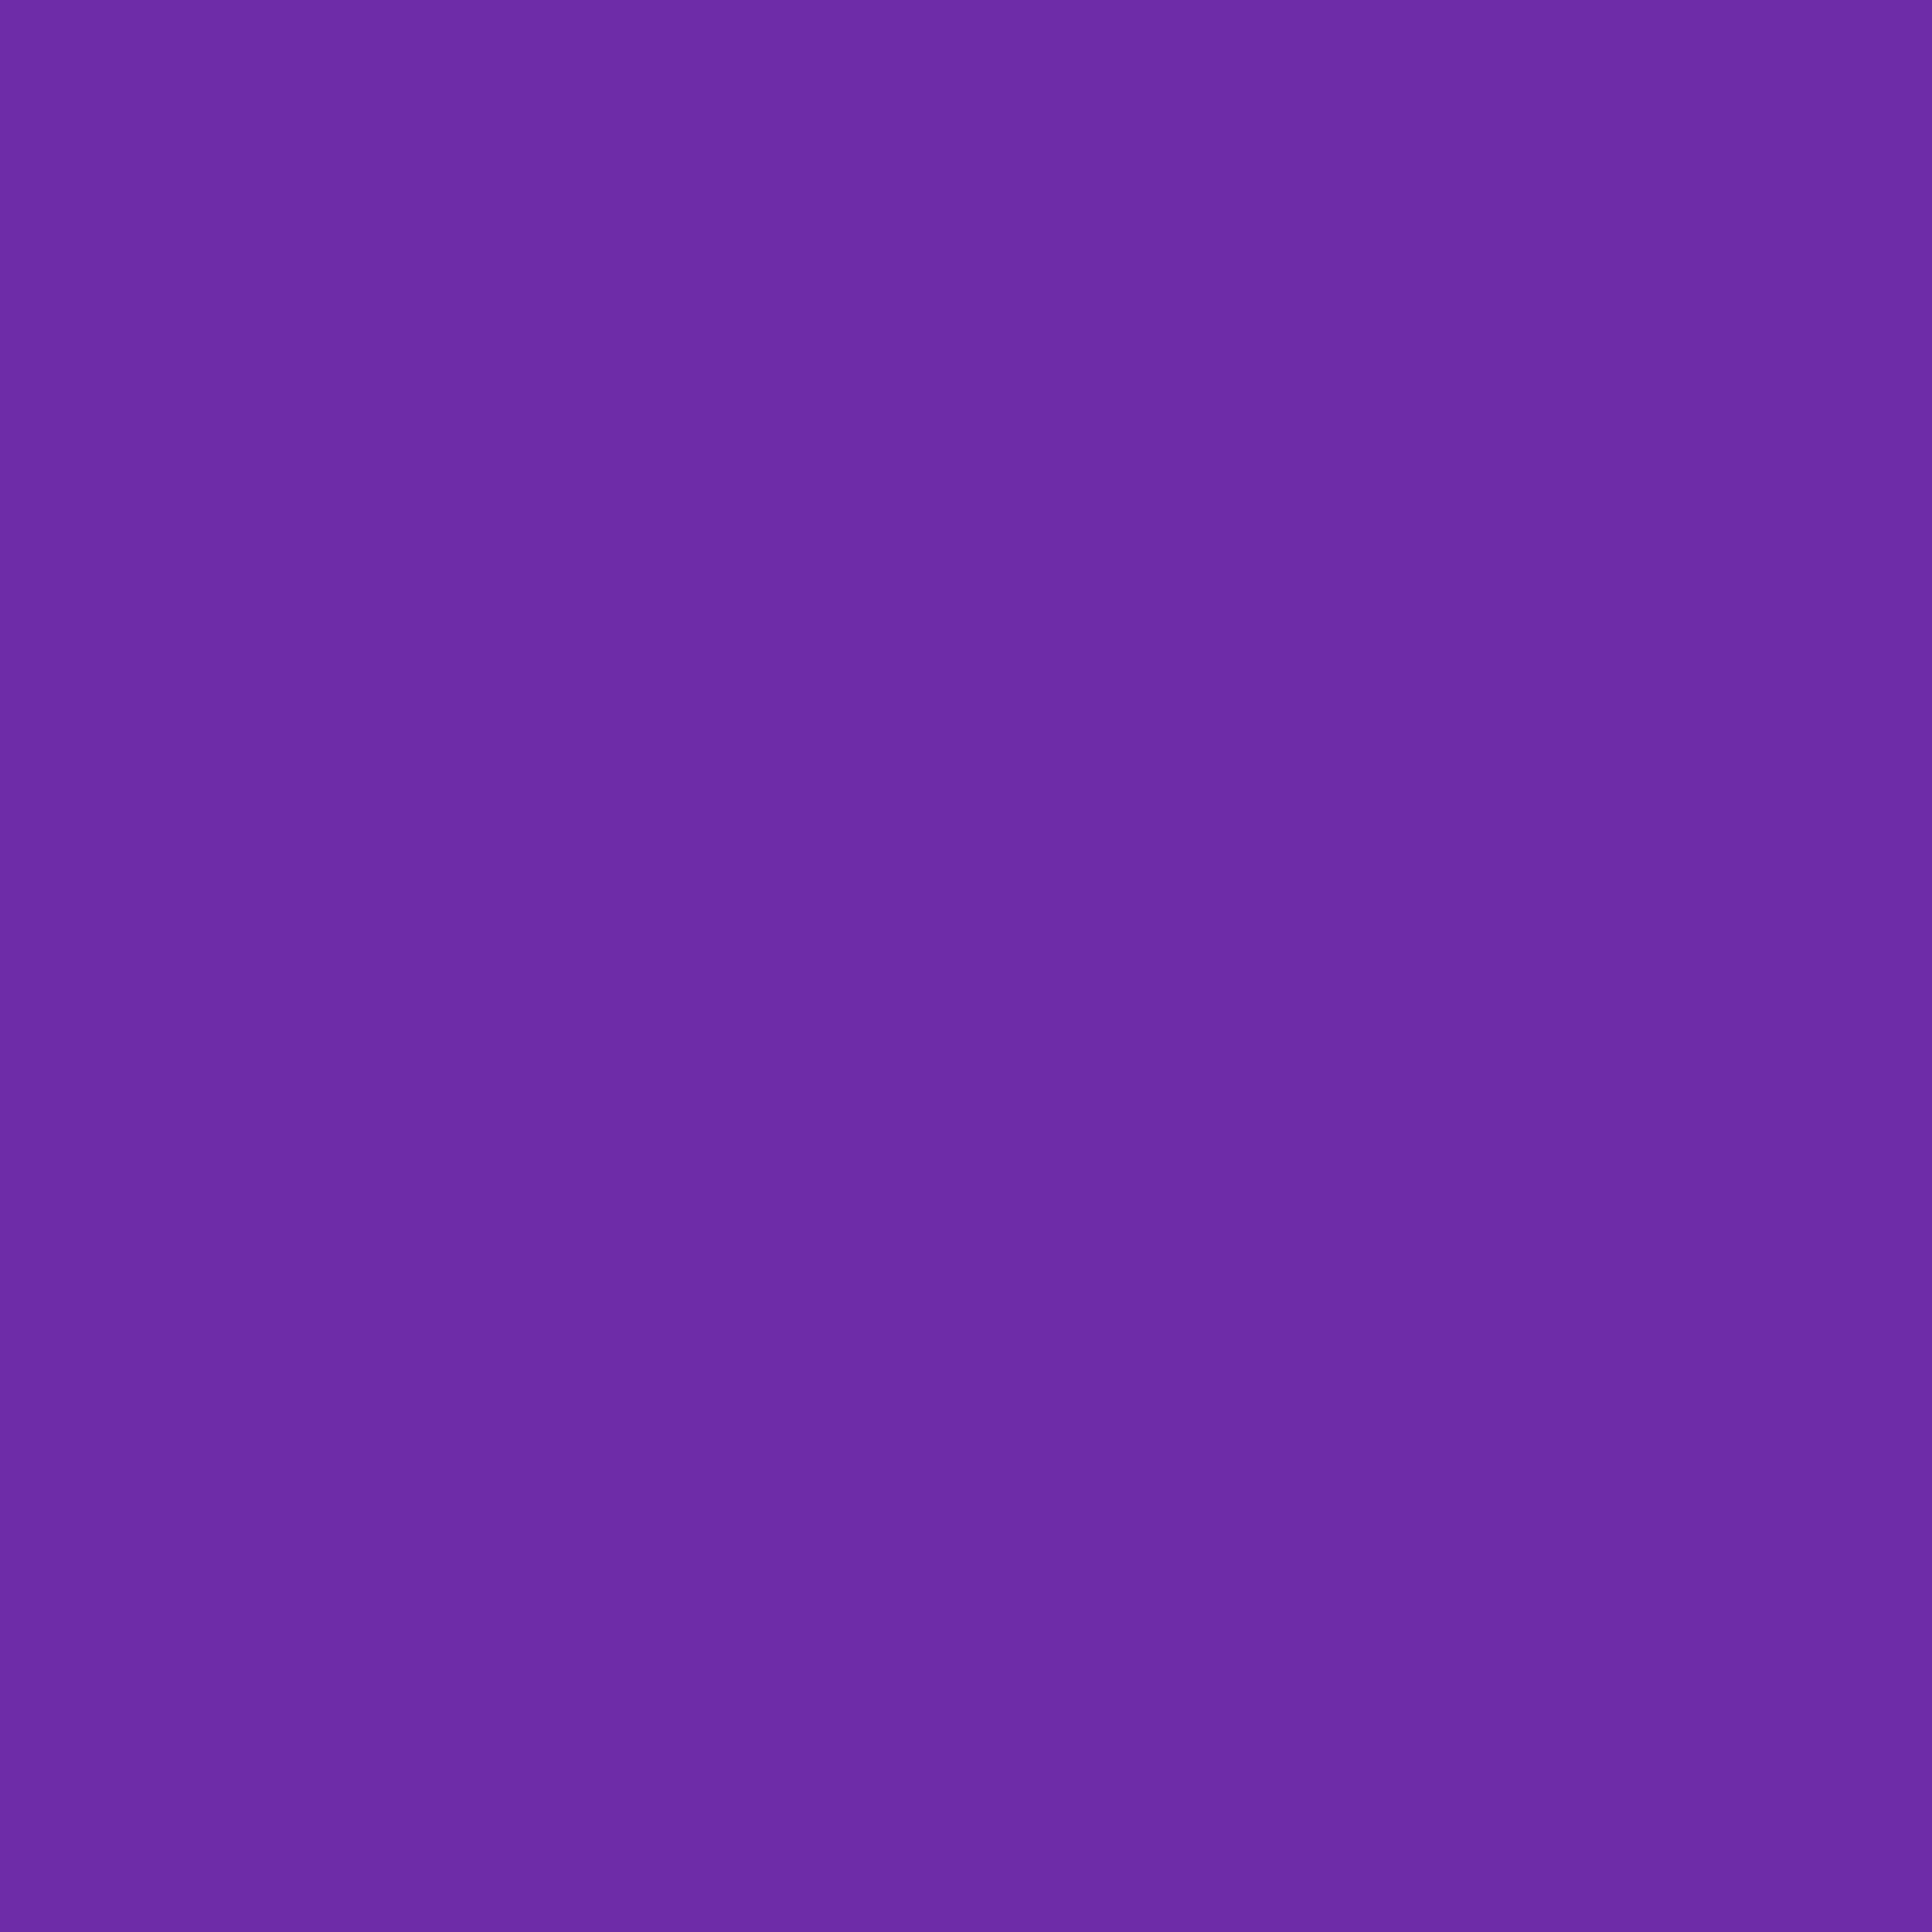 2048x2048 Grape Solid Color Background